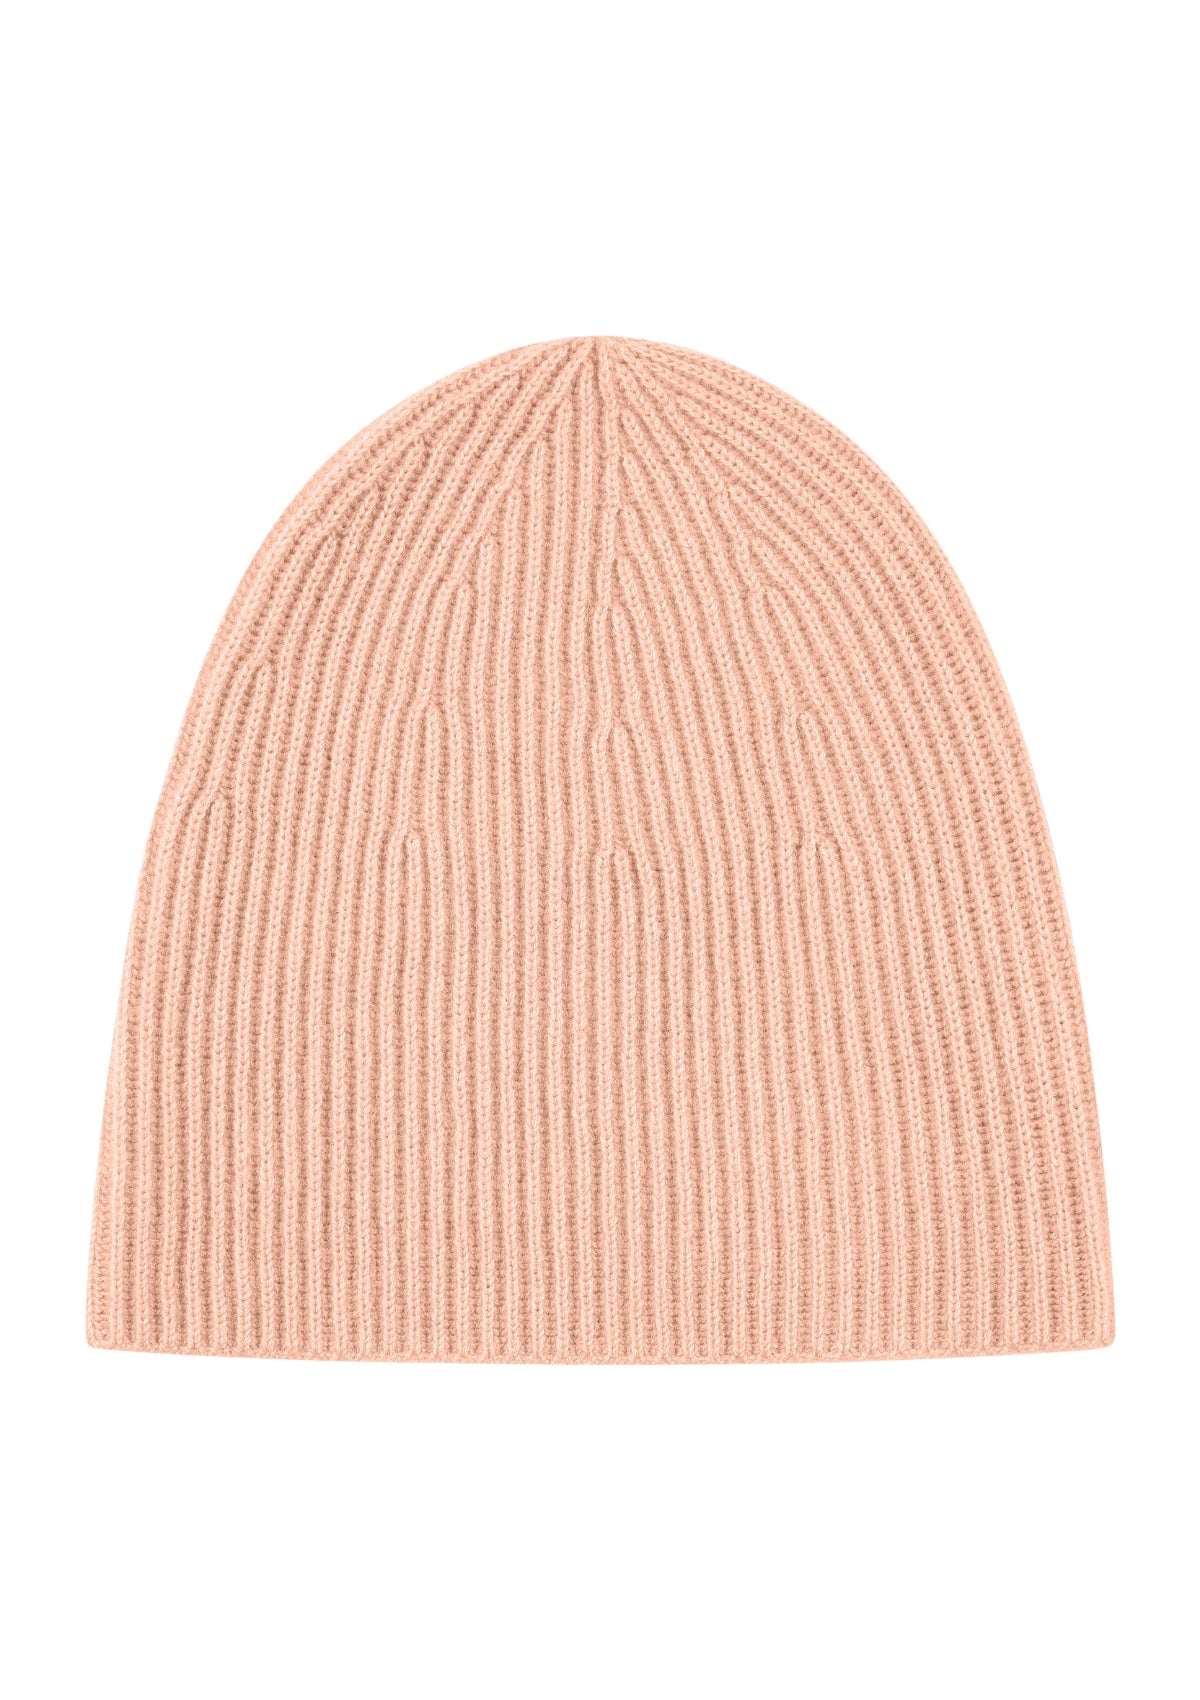 Cashmere Beanie in Toffee